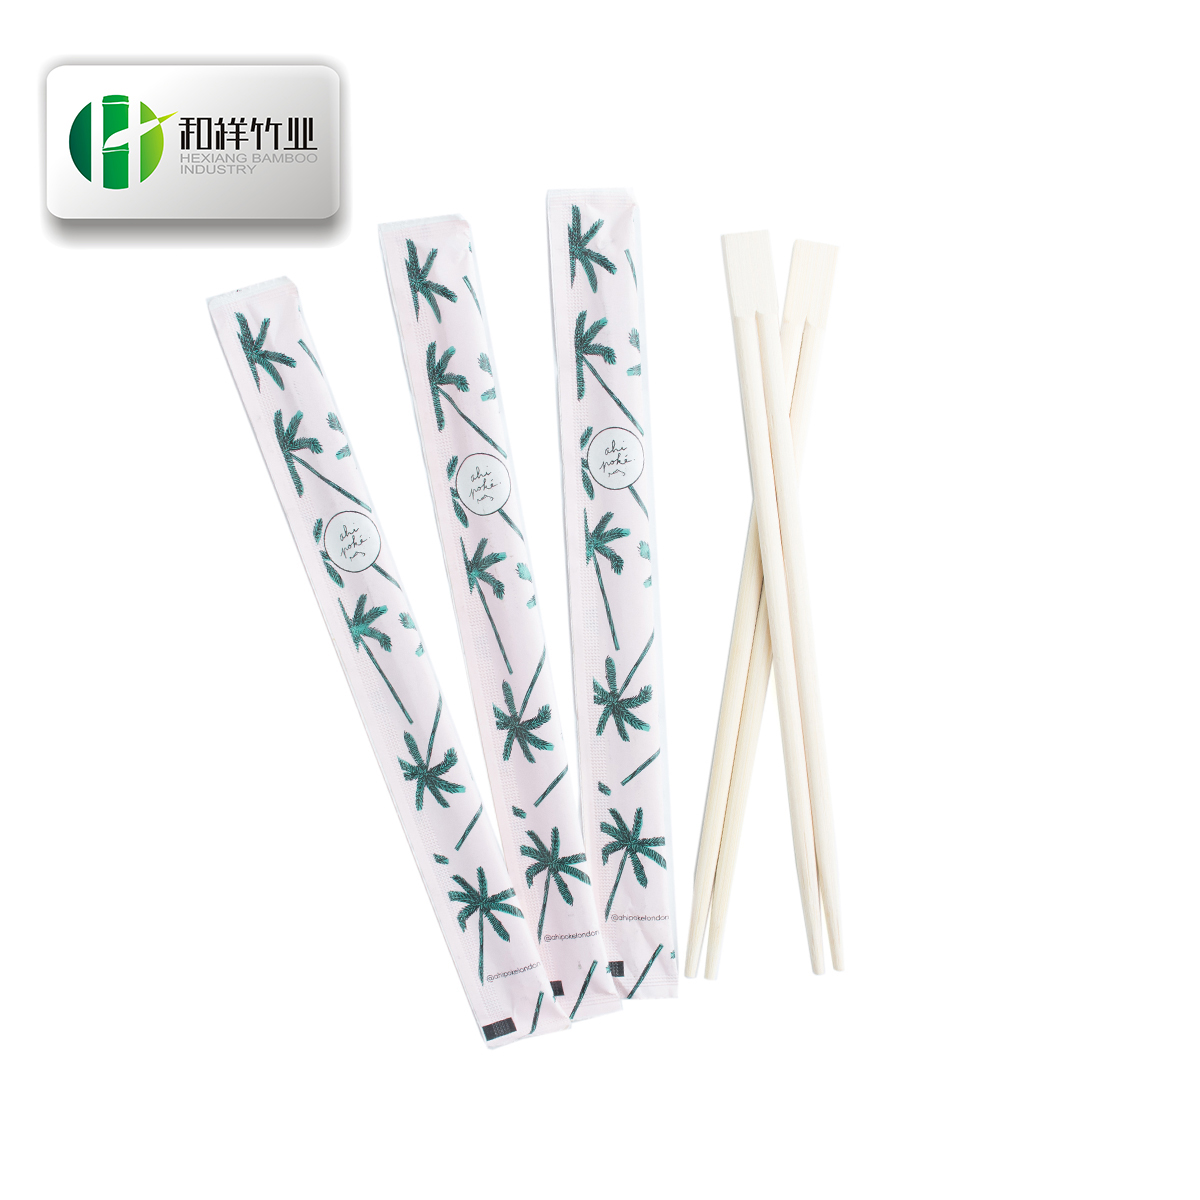 Twin chopsticks with full paper sleeve